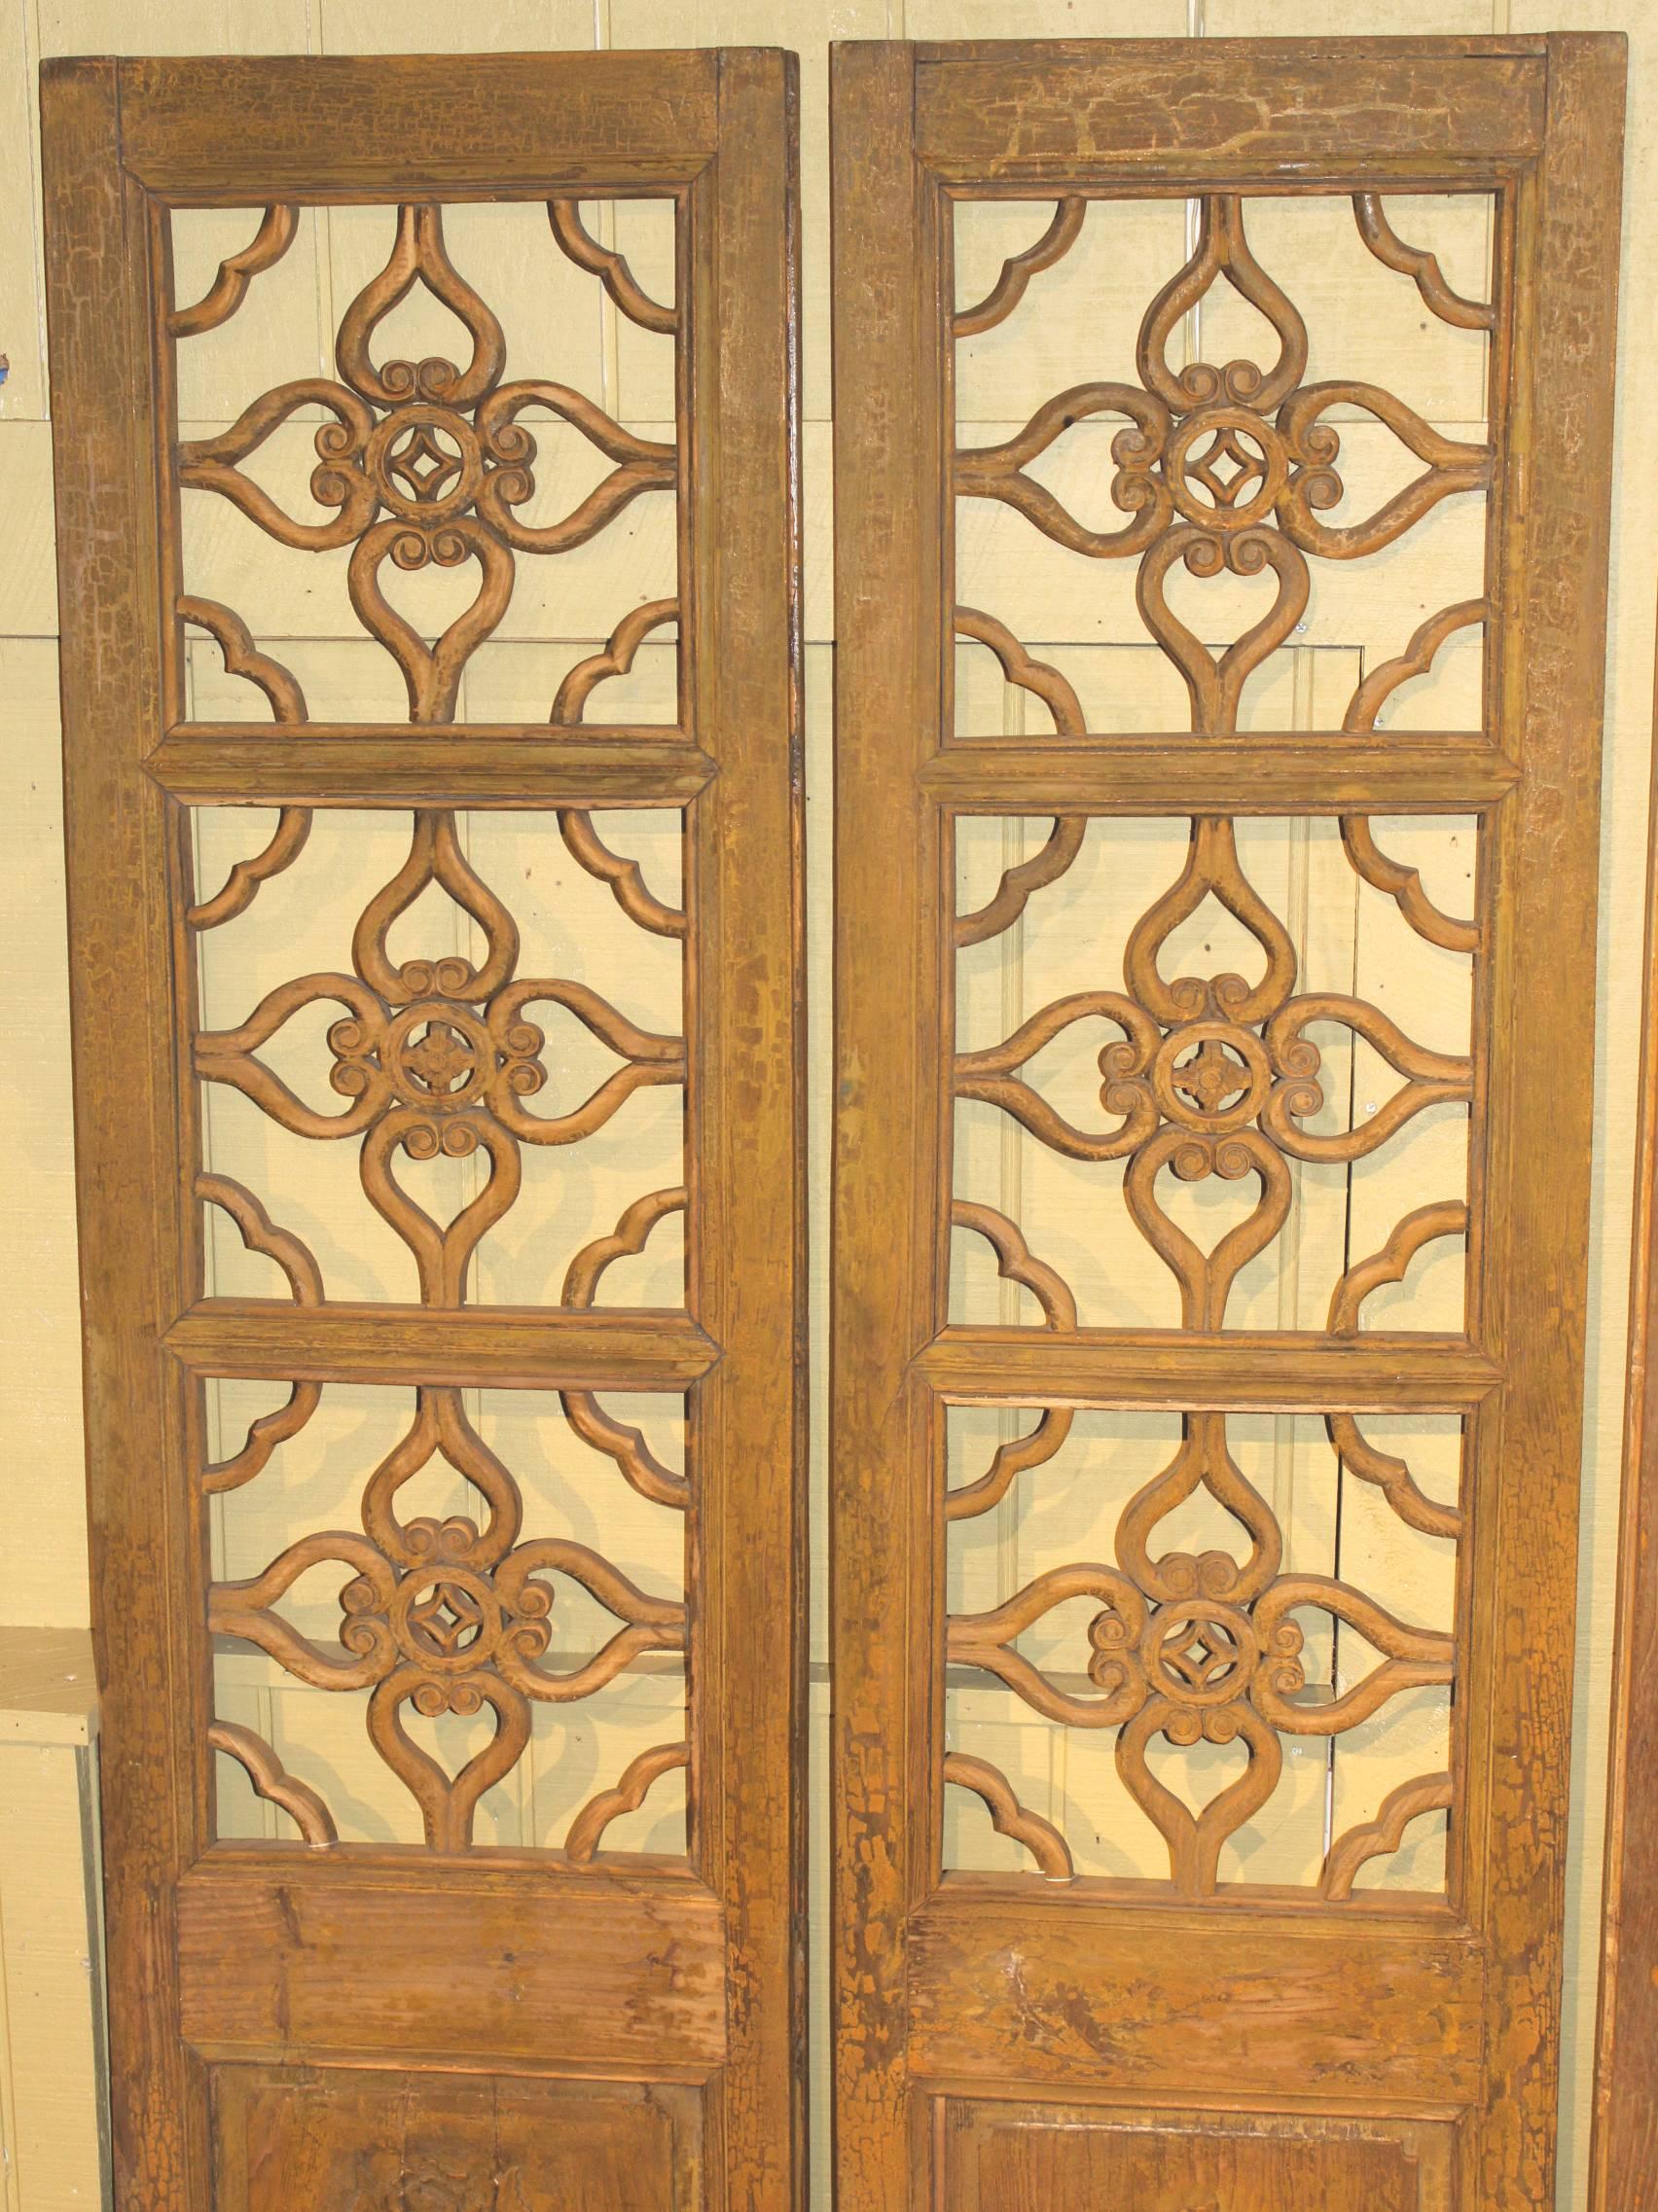 Four splendid carved panels of an antique Chinese wooden screen with the open four lucky keys carved pattern in the top panels, circa 1916, in old yellow or gold paint on one side, old blue paint on verso, with carved birds, possibly peacocks, and